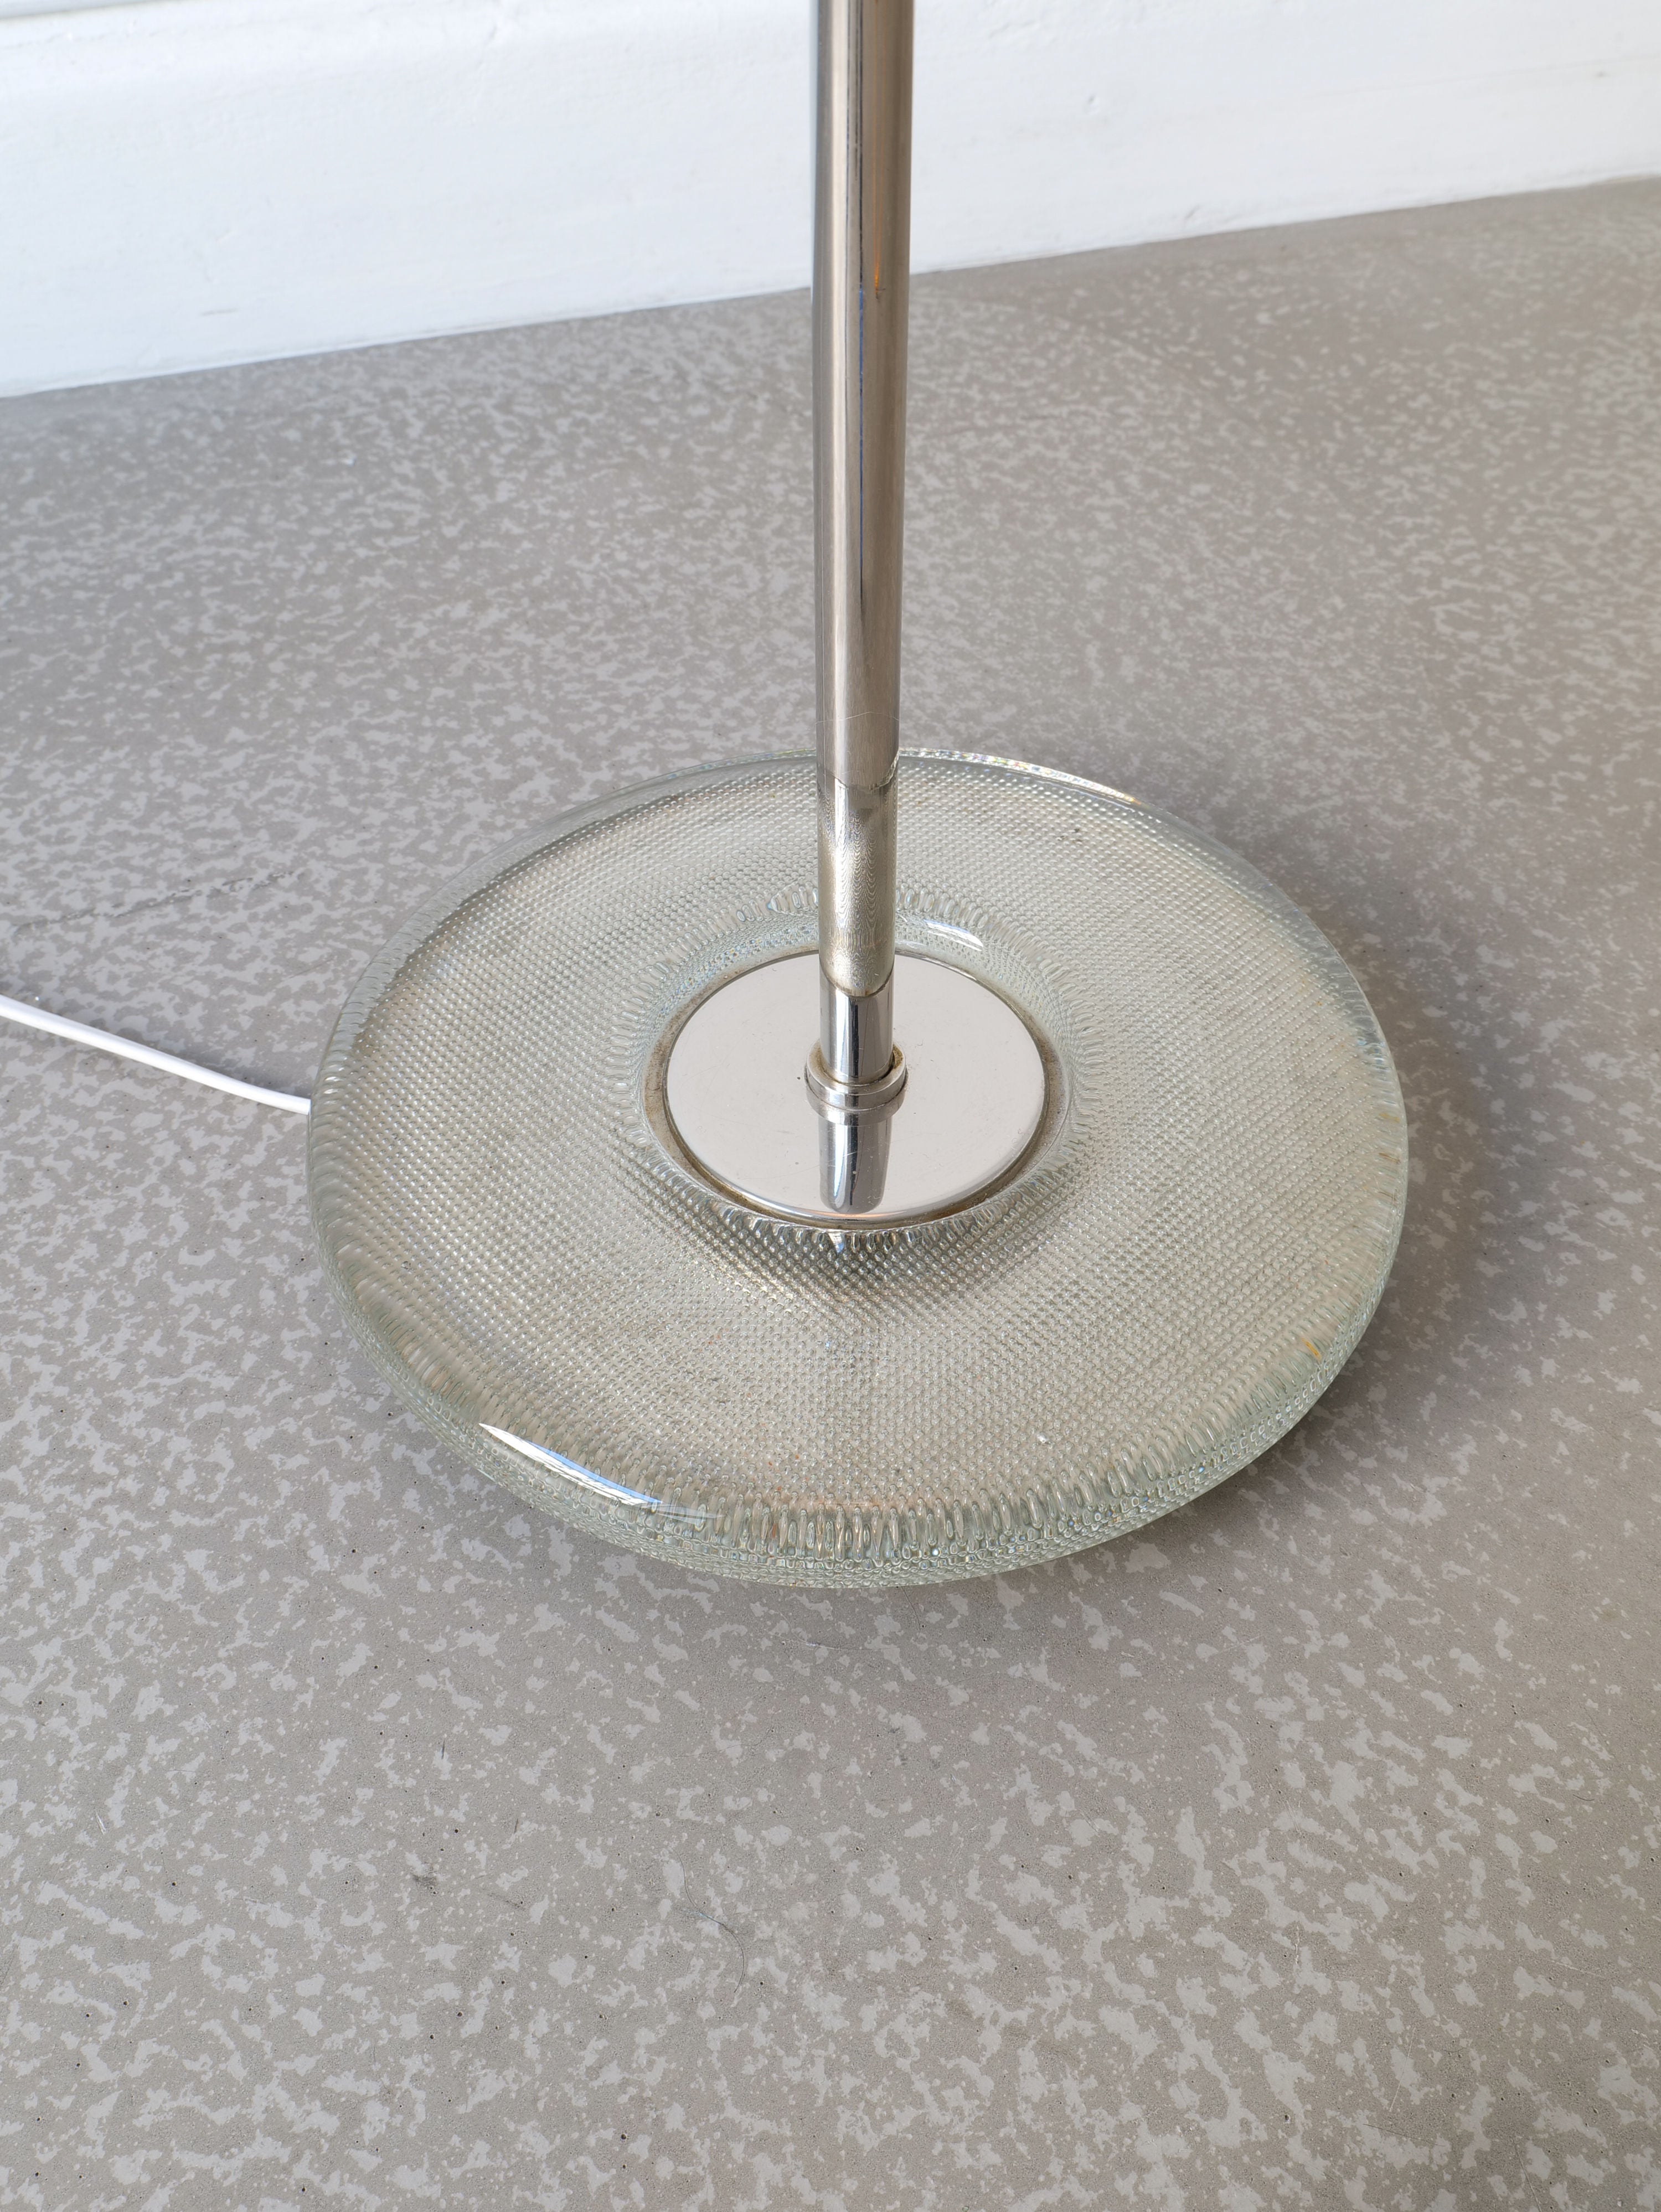 A close-up of a Deco Floor Lamp Harald Notini 1940s by Collection apart base featuring a textured, circular glass disc with a metallic rod extending vertically from its center. The lamp stands on a speckled gray surface, and the white power cord is slightly visible on the left side.